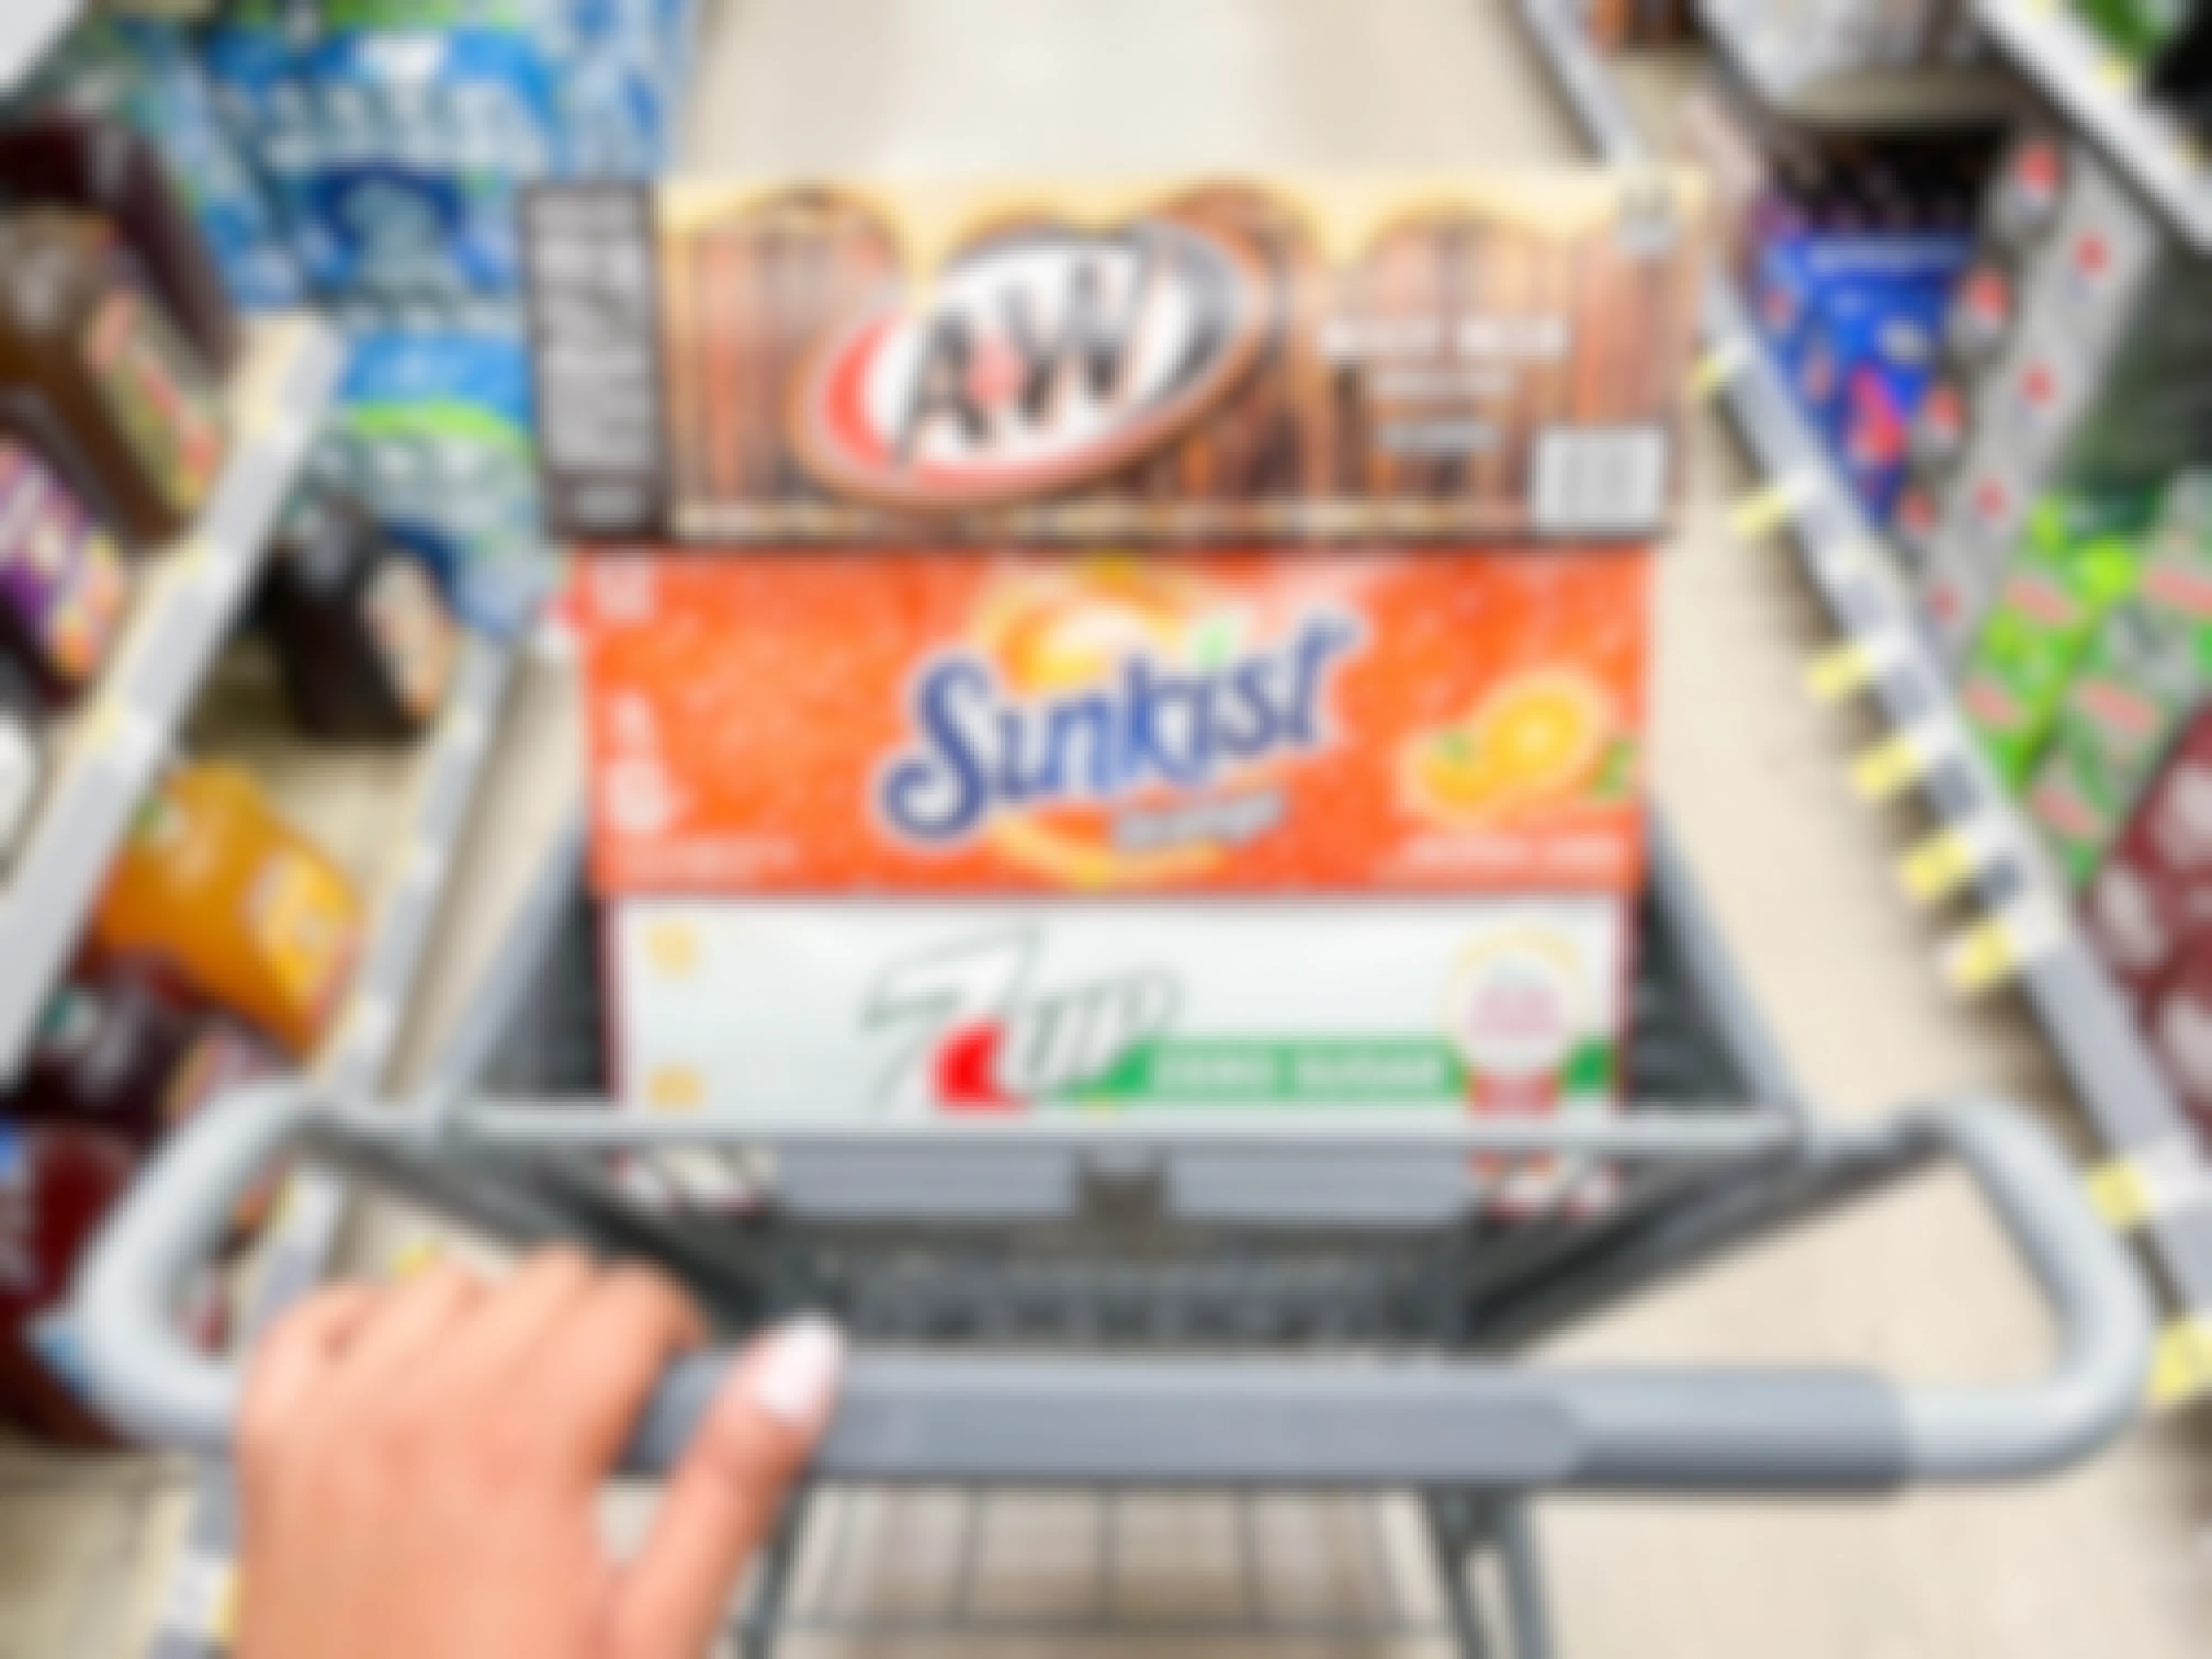 hand pushing shopping cart with A&W, Sunkist, and 7-Up 12-packs inside